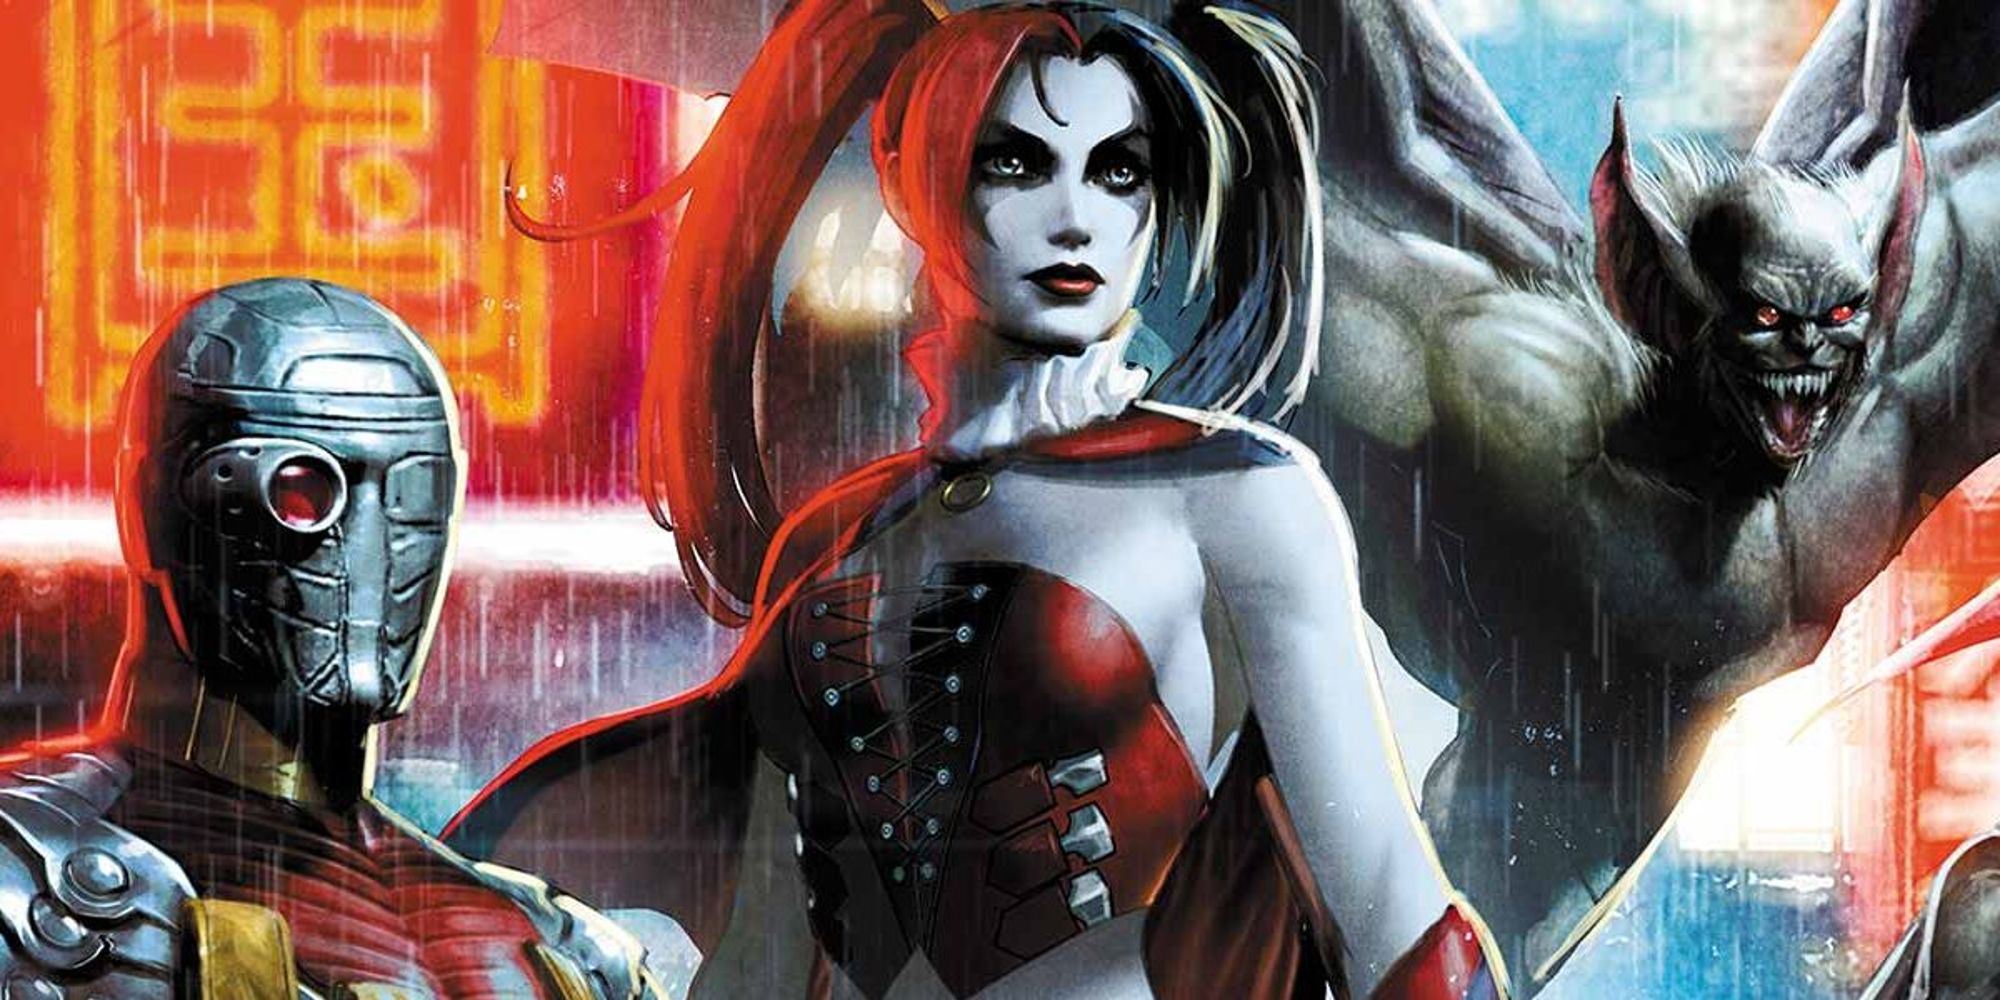 New 52 Harley Quinn with the Suicide Squad